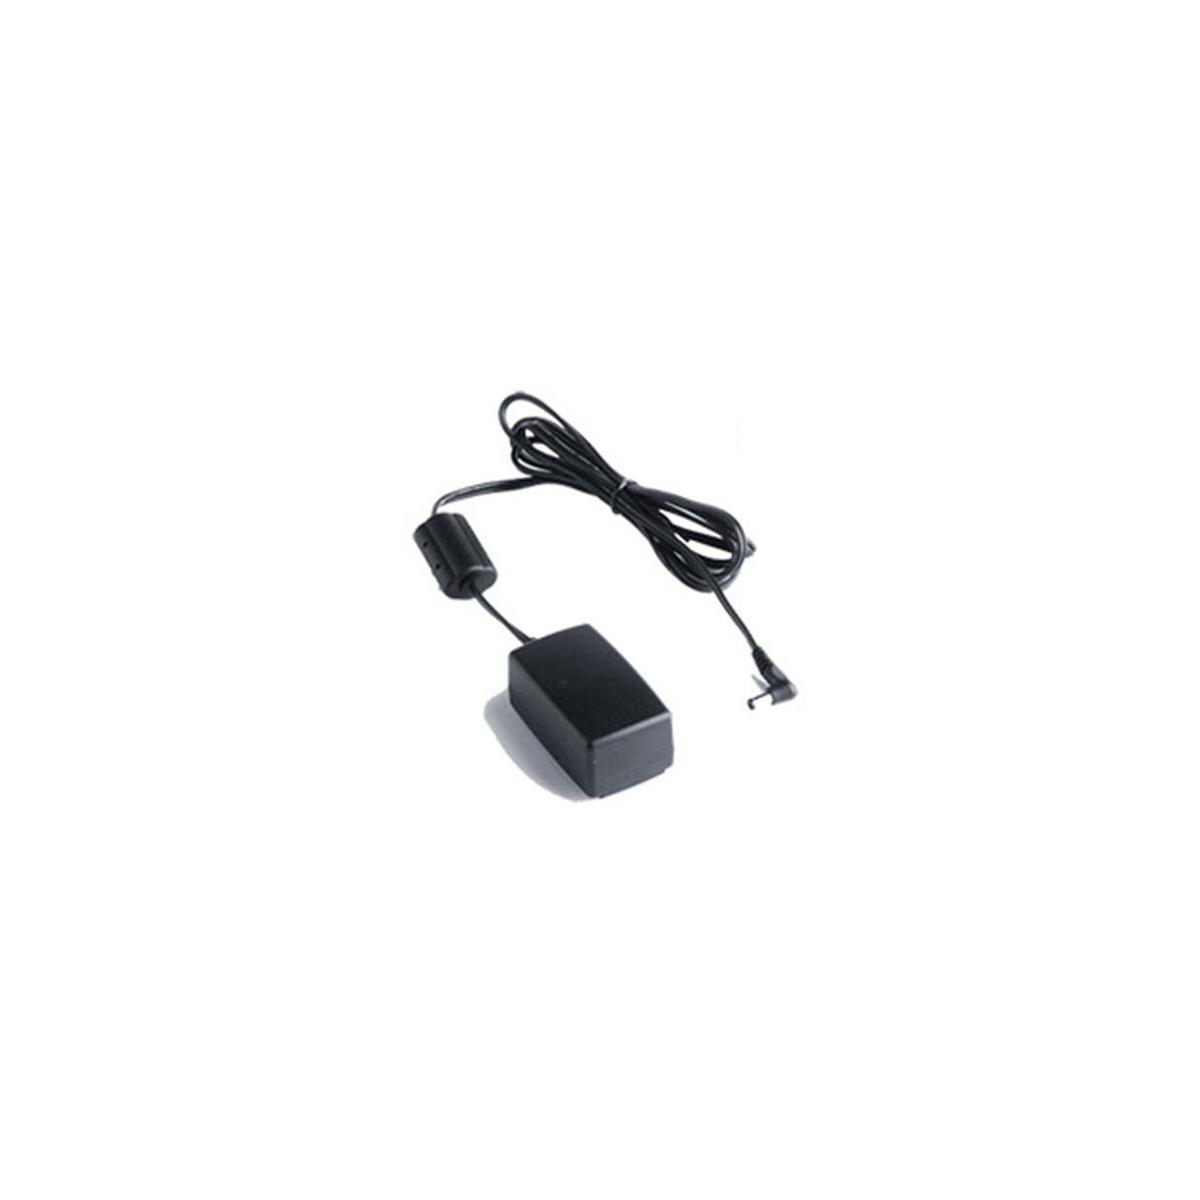 Photos - Mobile Phone Headset ClearOne 15W 7V DC Universal Power Supply without Power Clips 551-159-001 